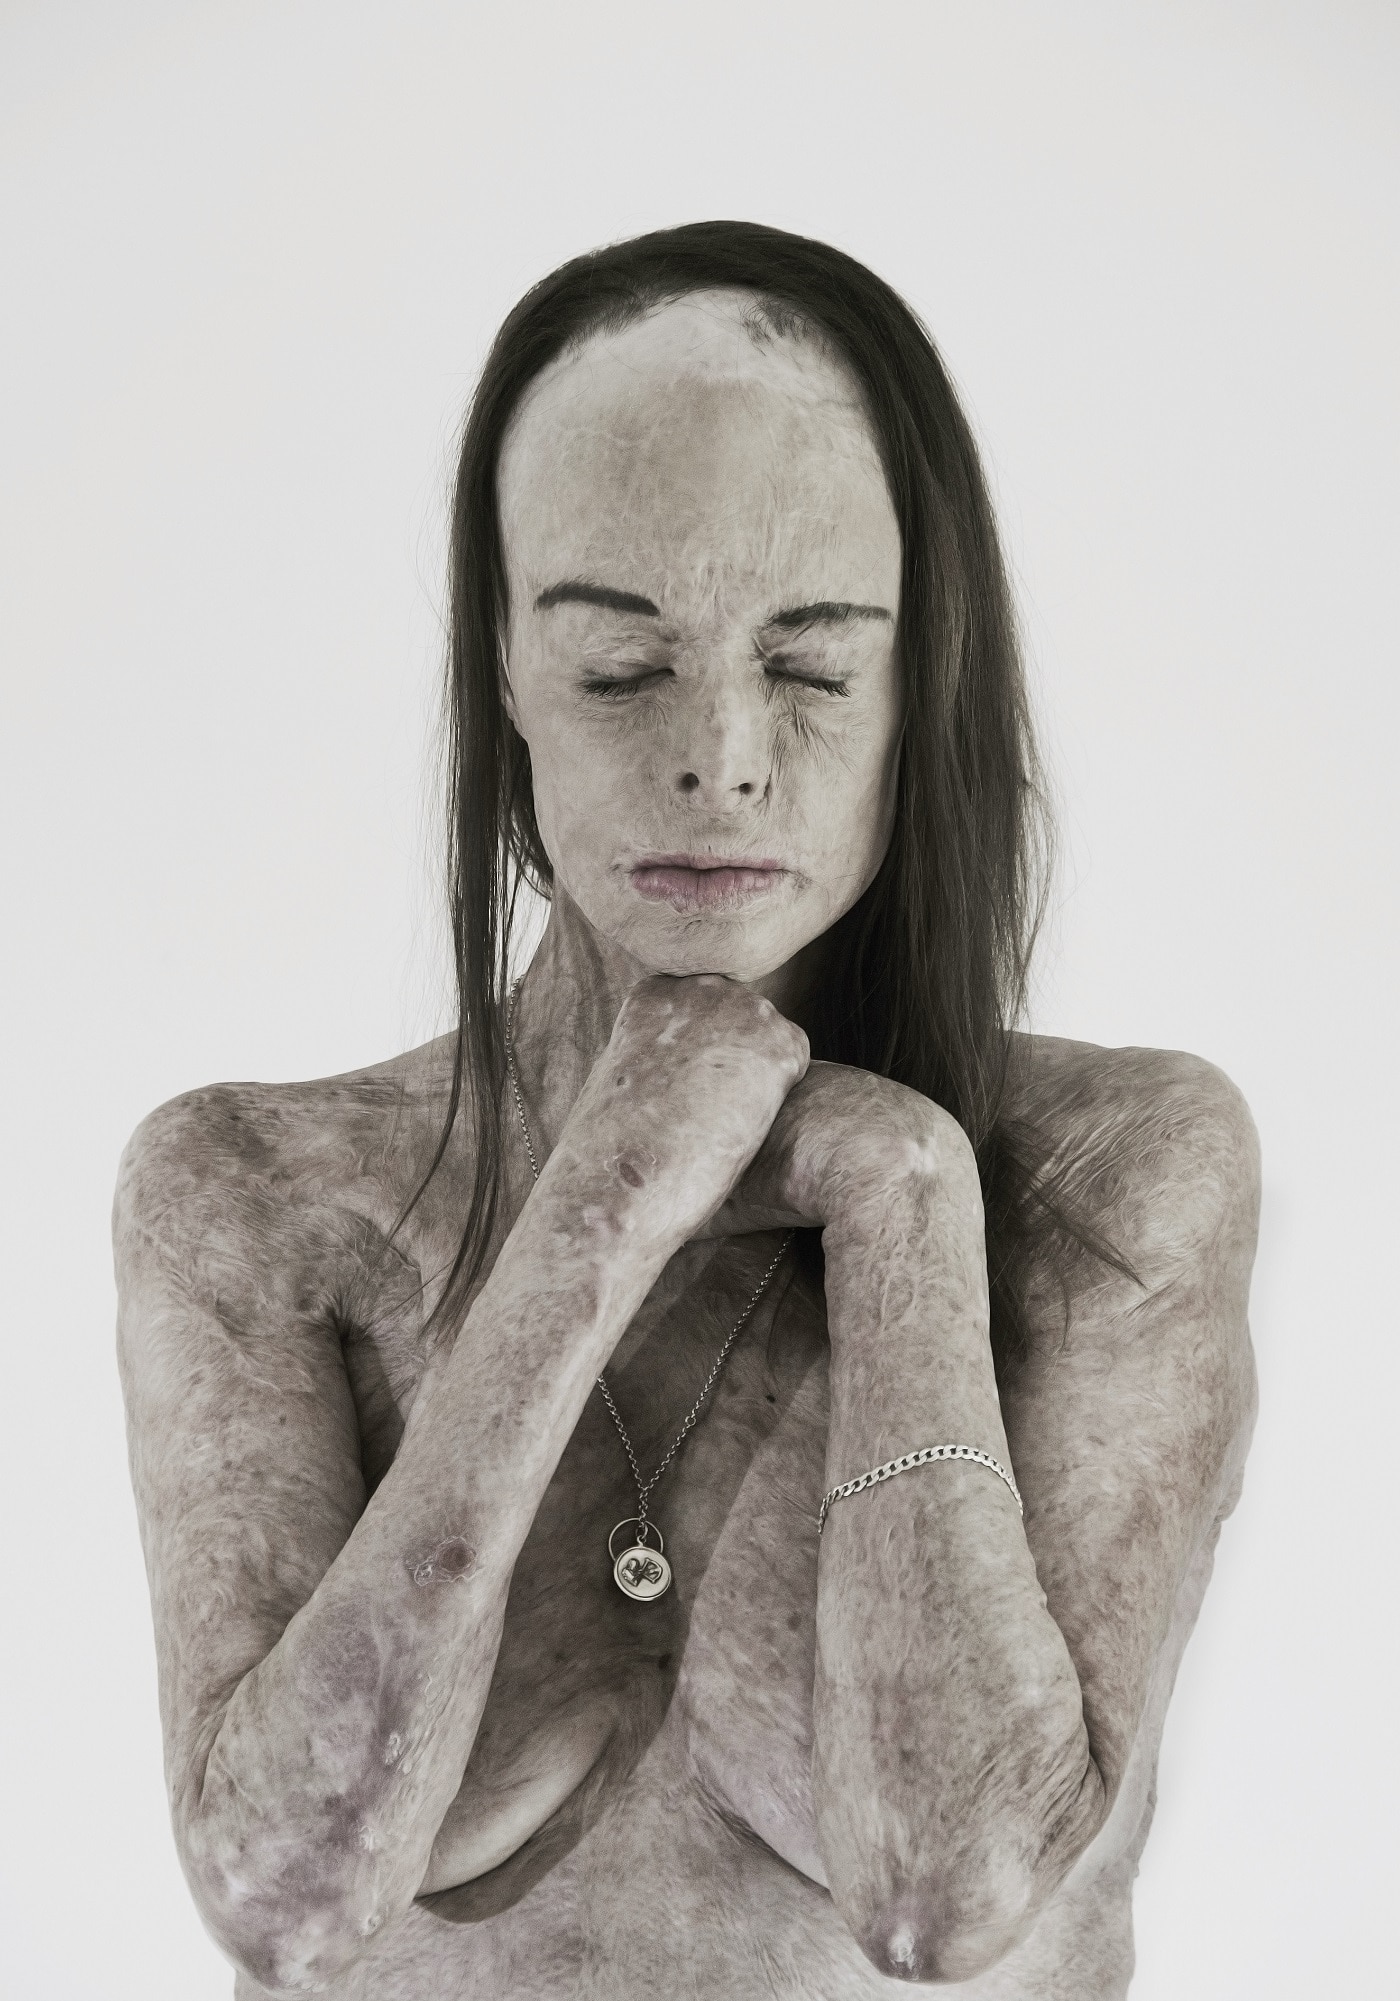 A woman with scarred skin poses nude with her eyes closed.